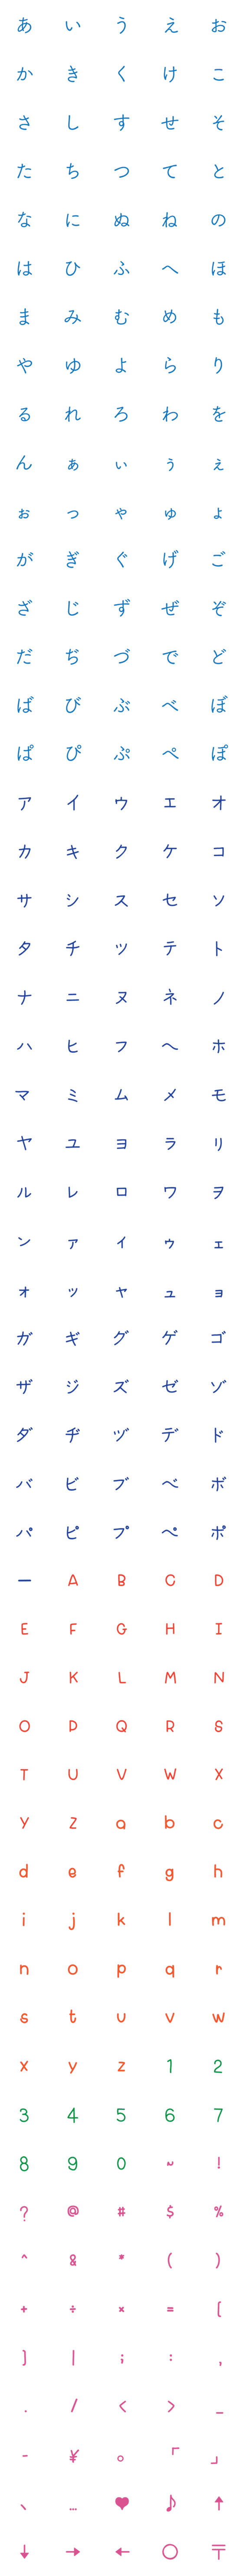 [LINE絵文字]Simple Japanese-English fontsの画像一覧